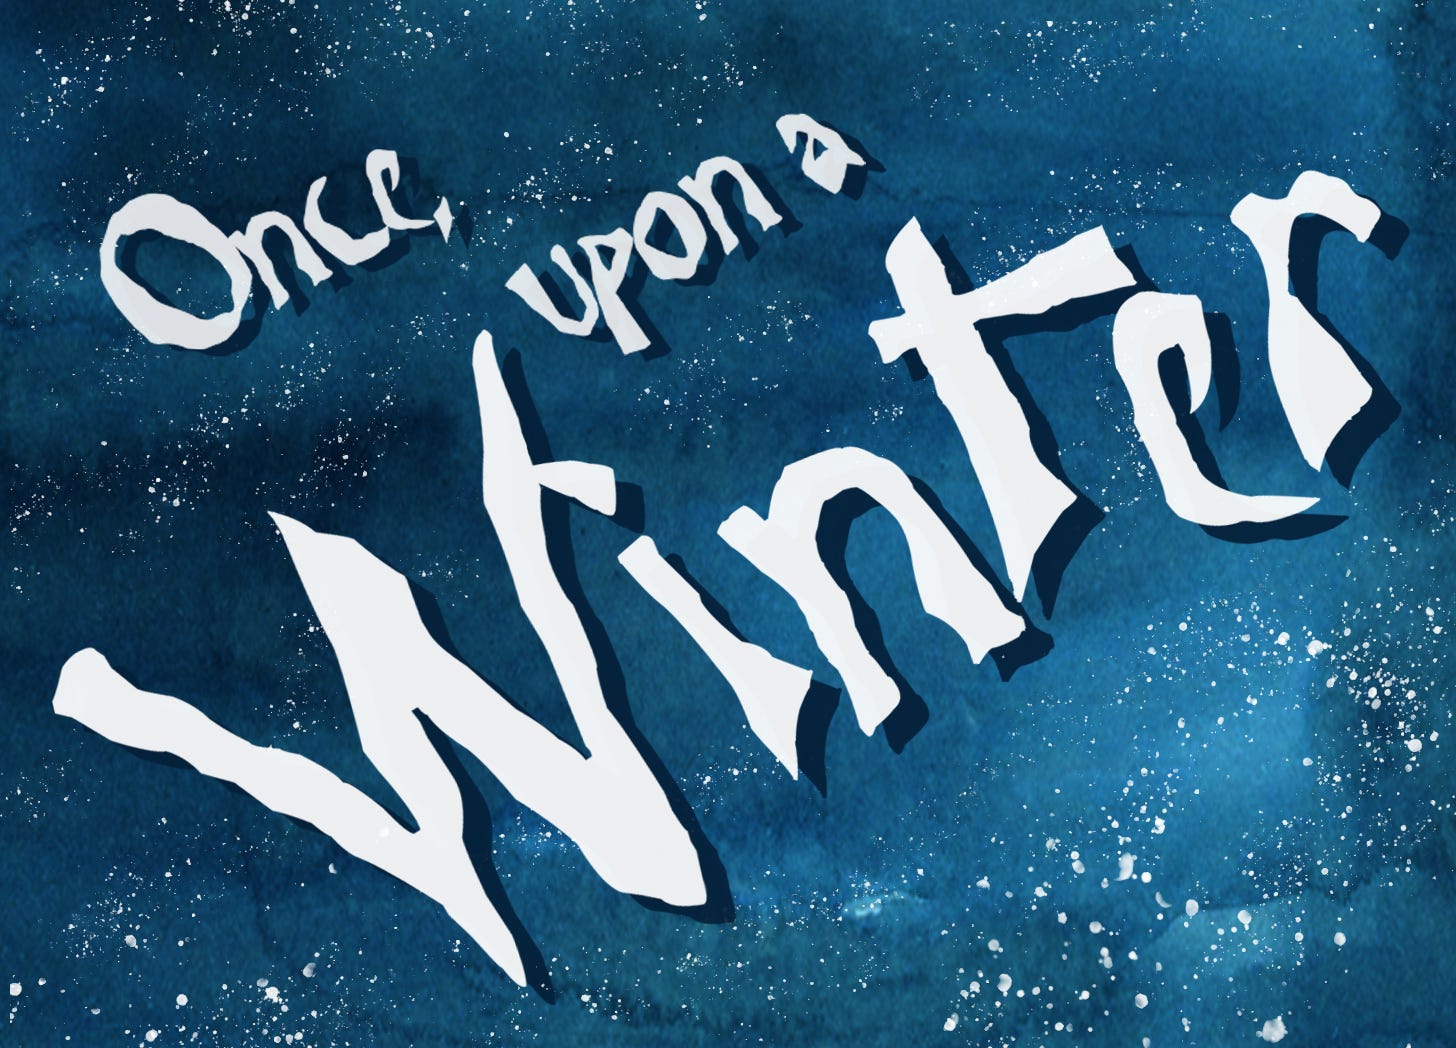 Once, upon a winter